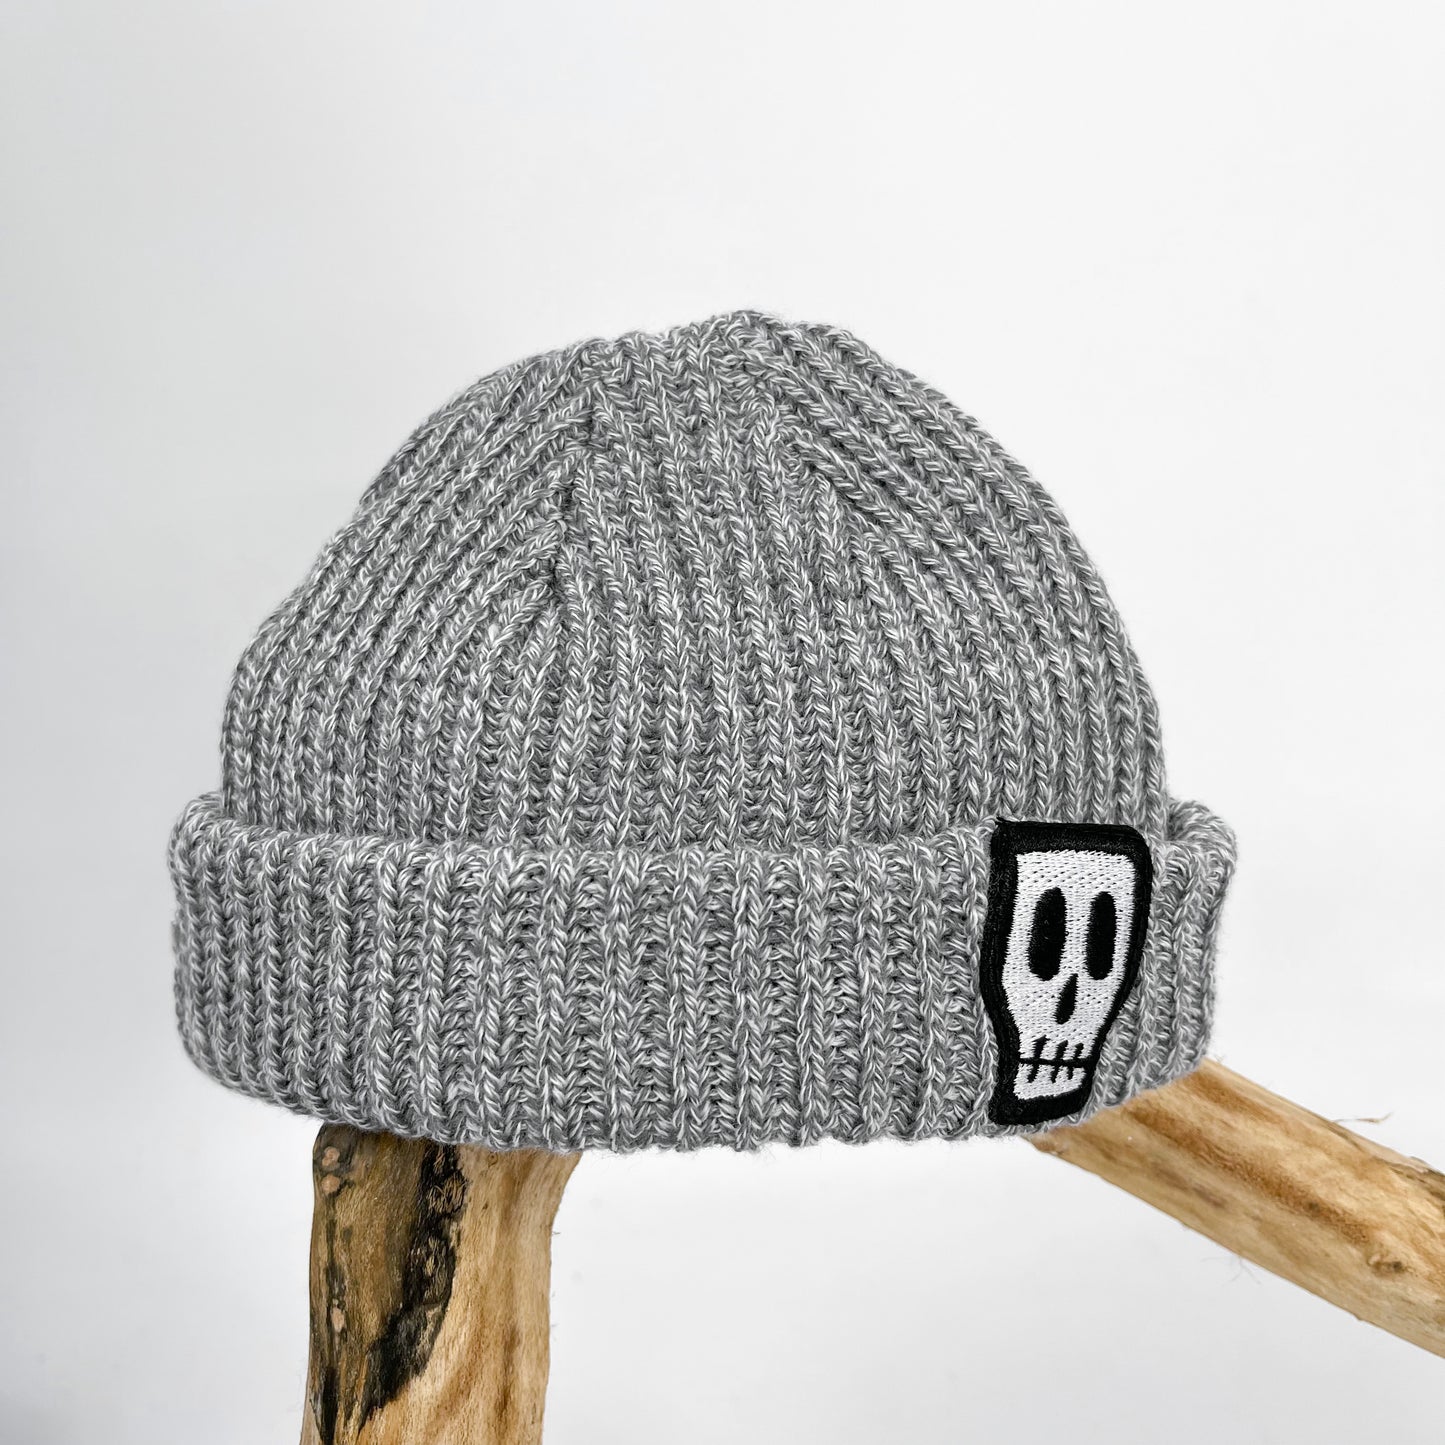 Kids trawler beanie, grey with embroidered Skelly Skull logo 